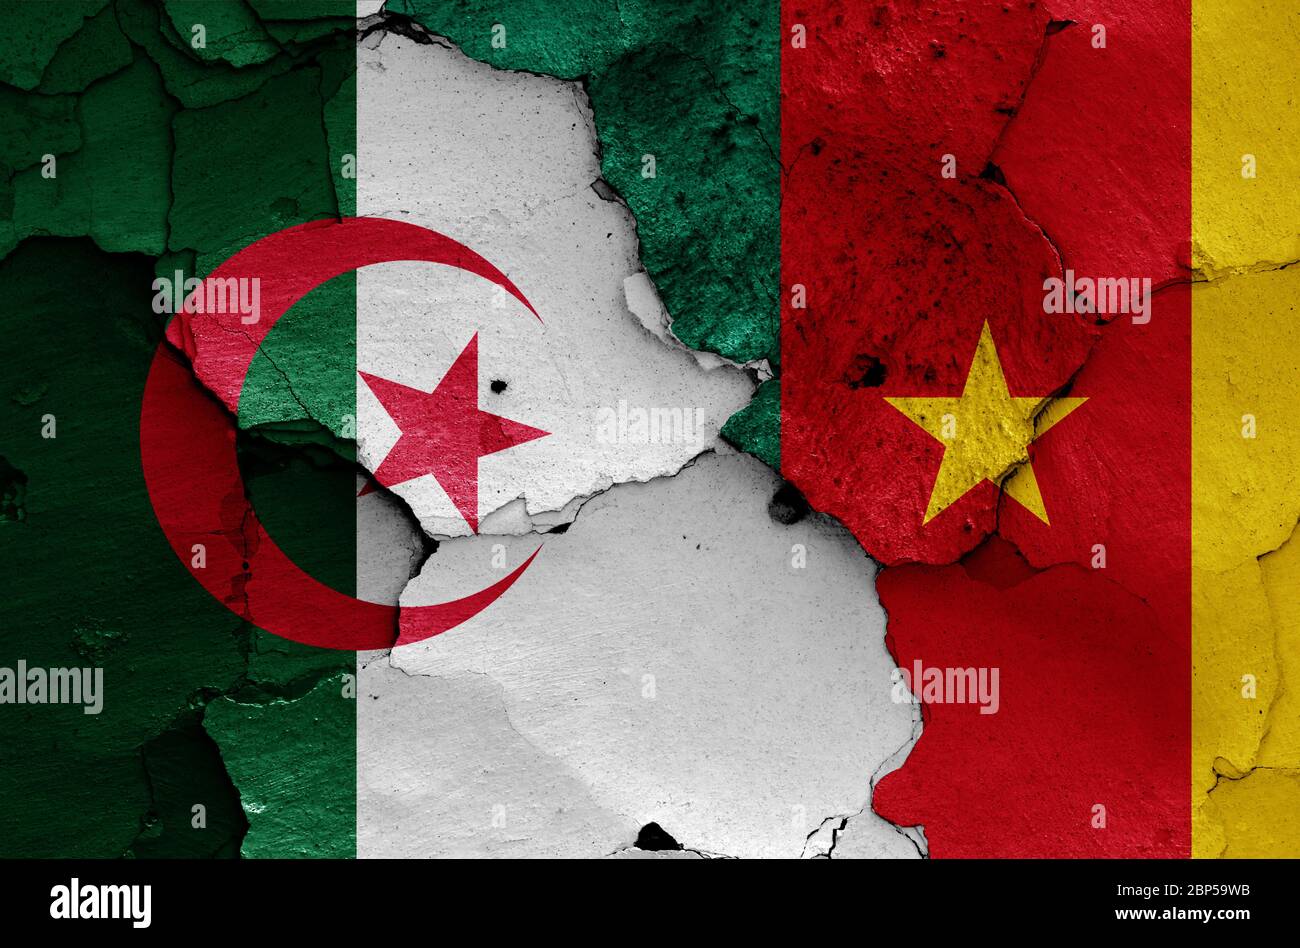 flags of Algeria and Cameroon painted on cracked wall Stock Photo